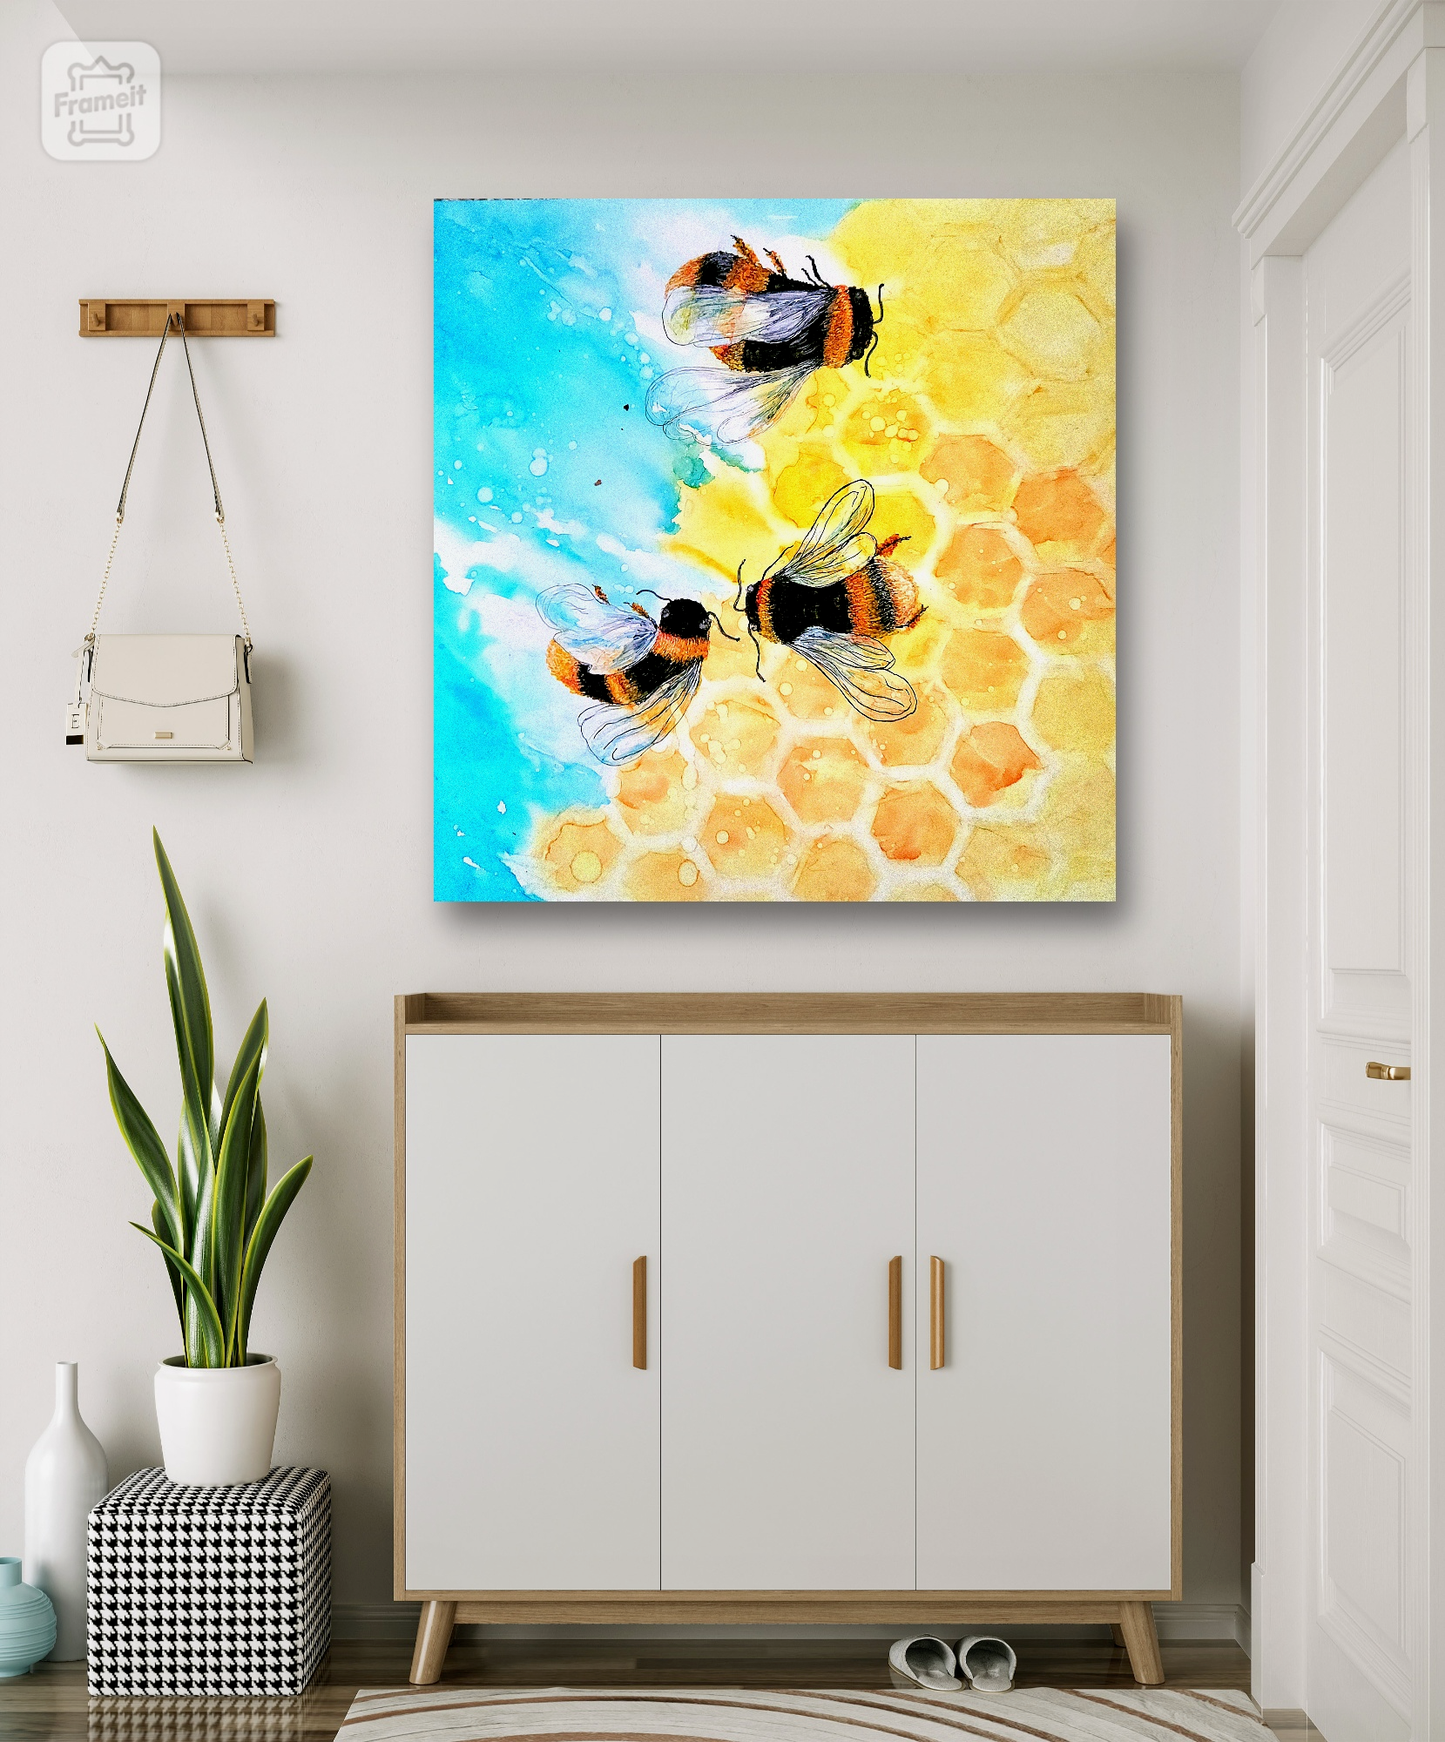 Bee-lieve Alcohol Ink Limited Edition Giclee Print by The Artful Lynk, Lynda Krupa Original Alcohol Ink Art